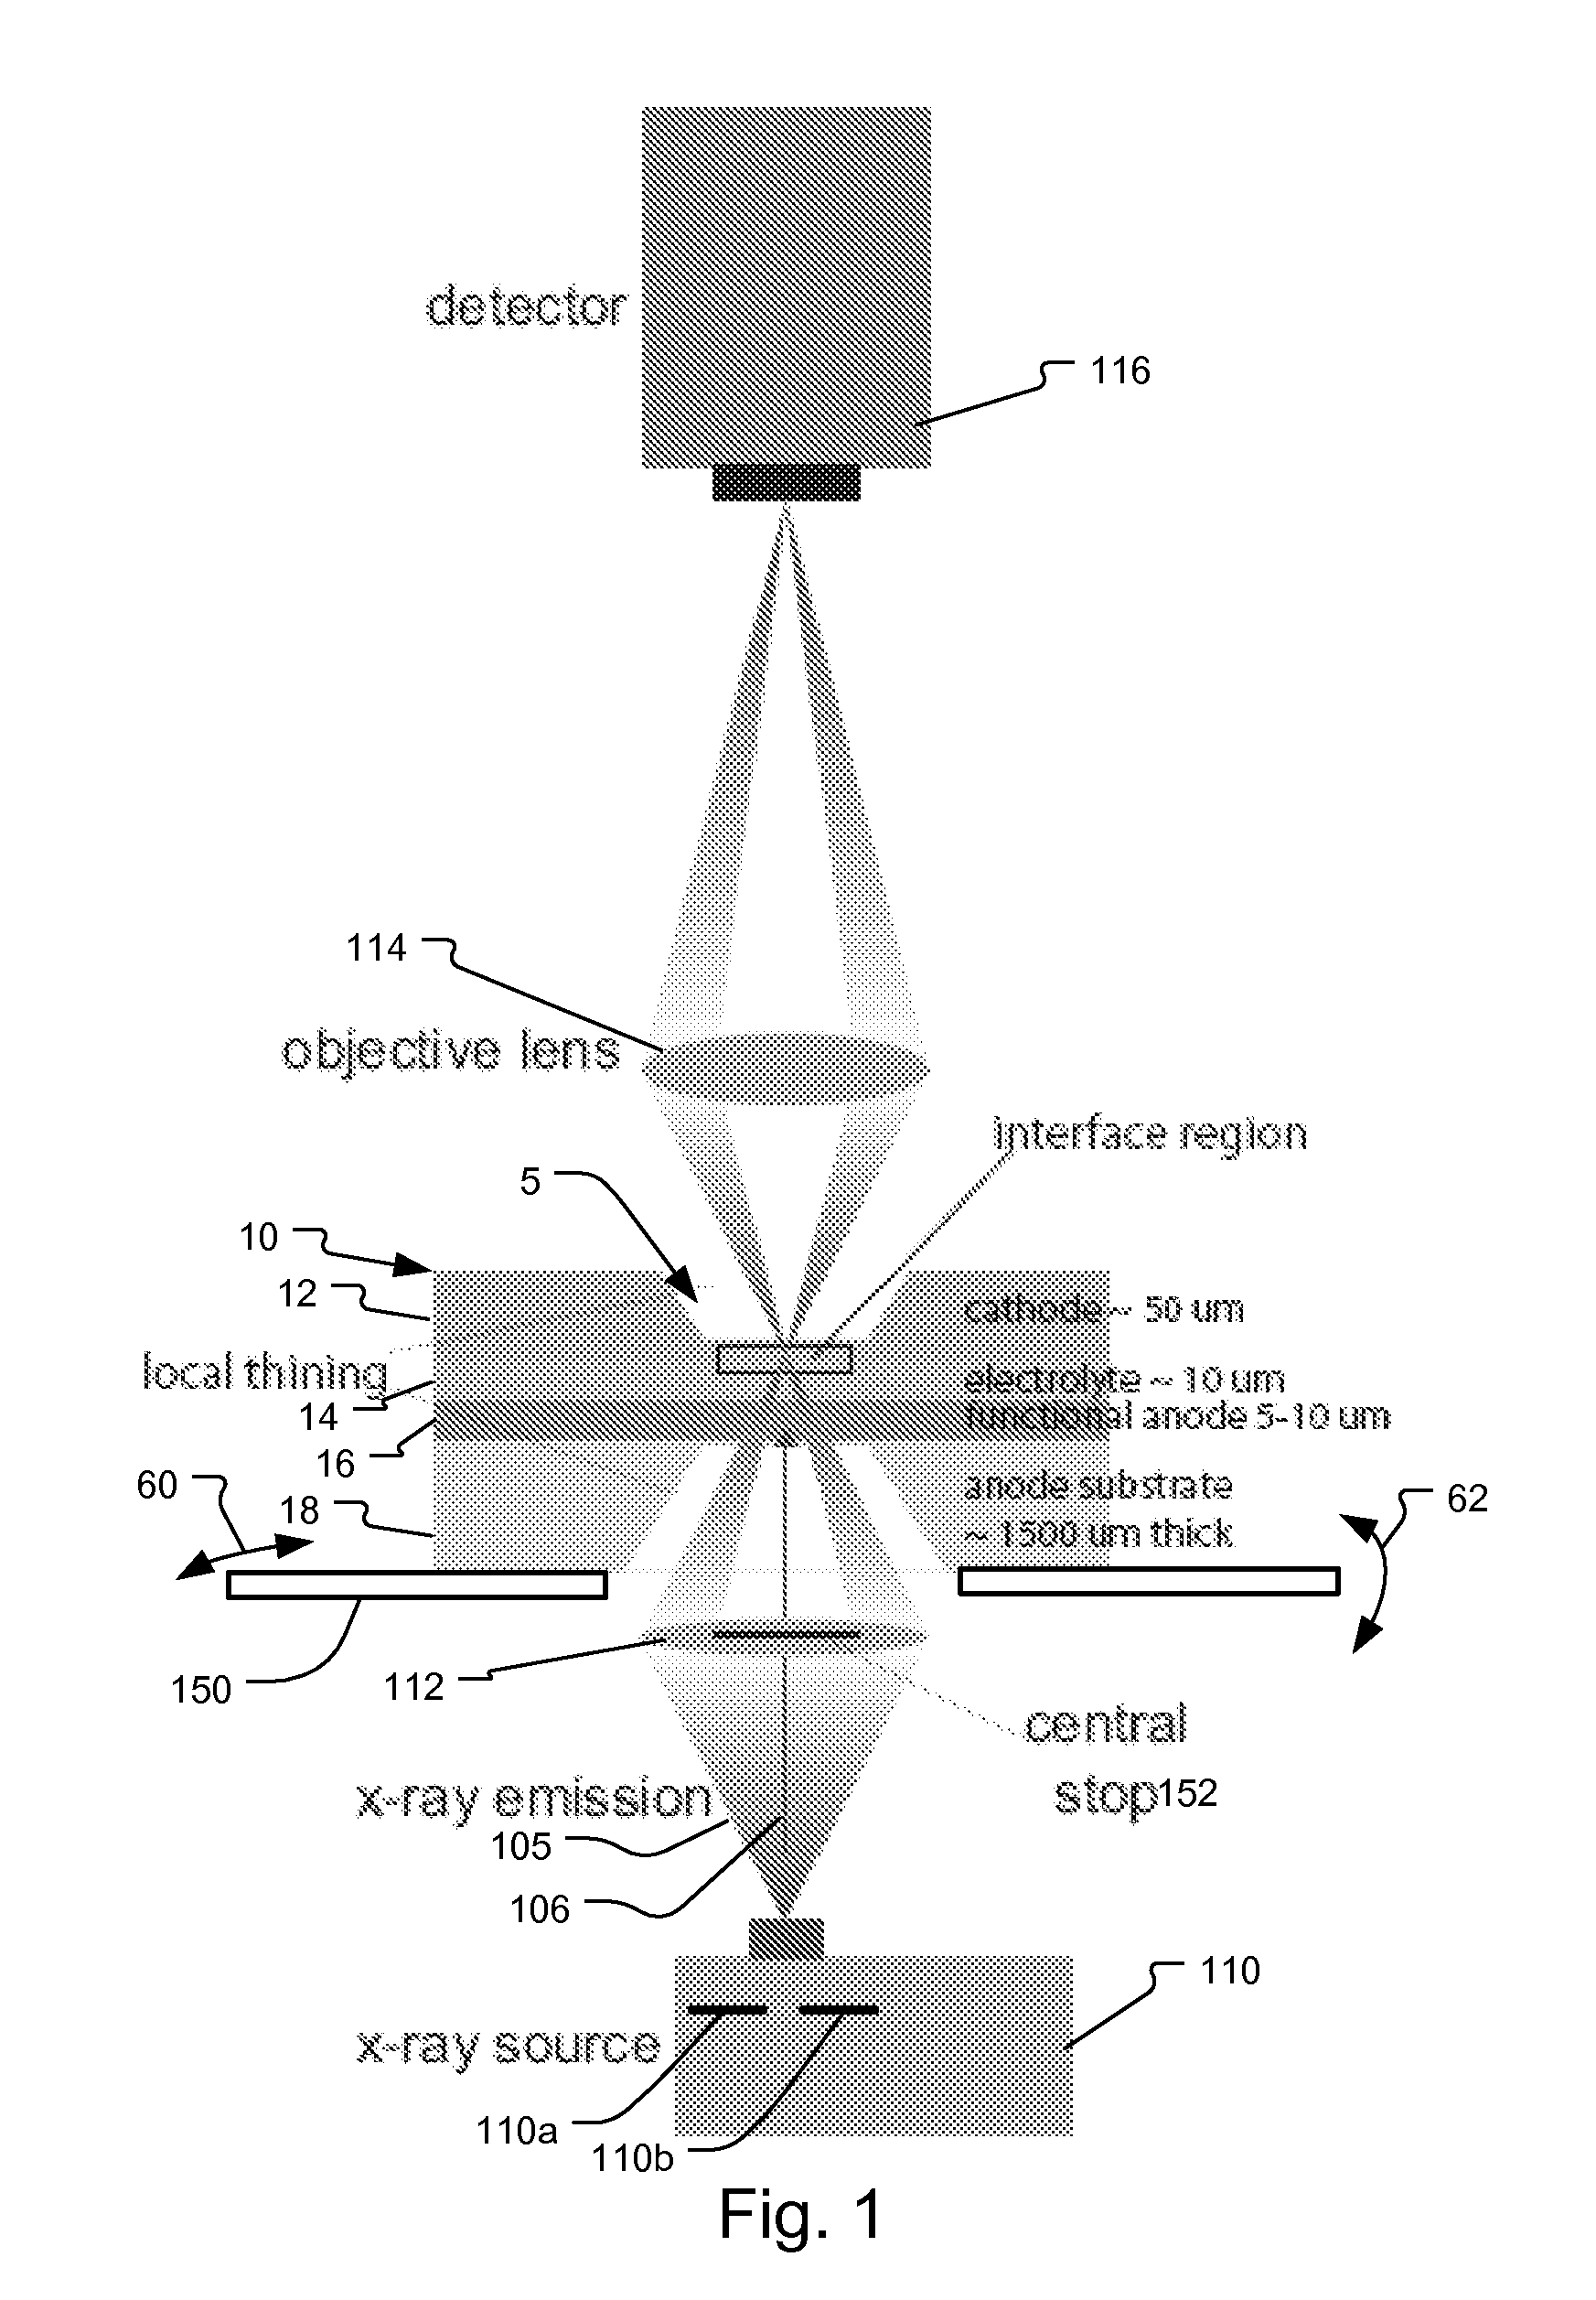 System and method for fuel cell material x-ray analysis